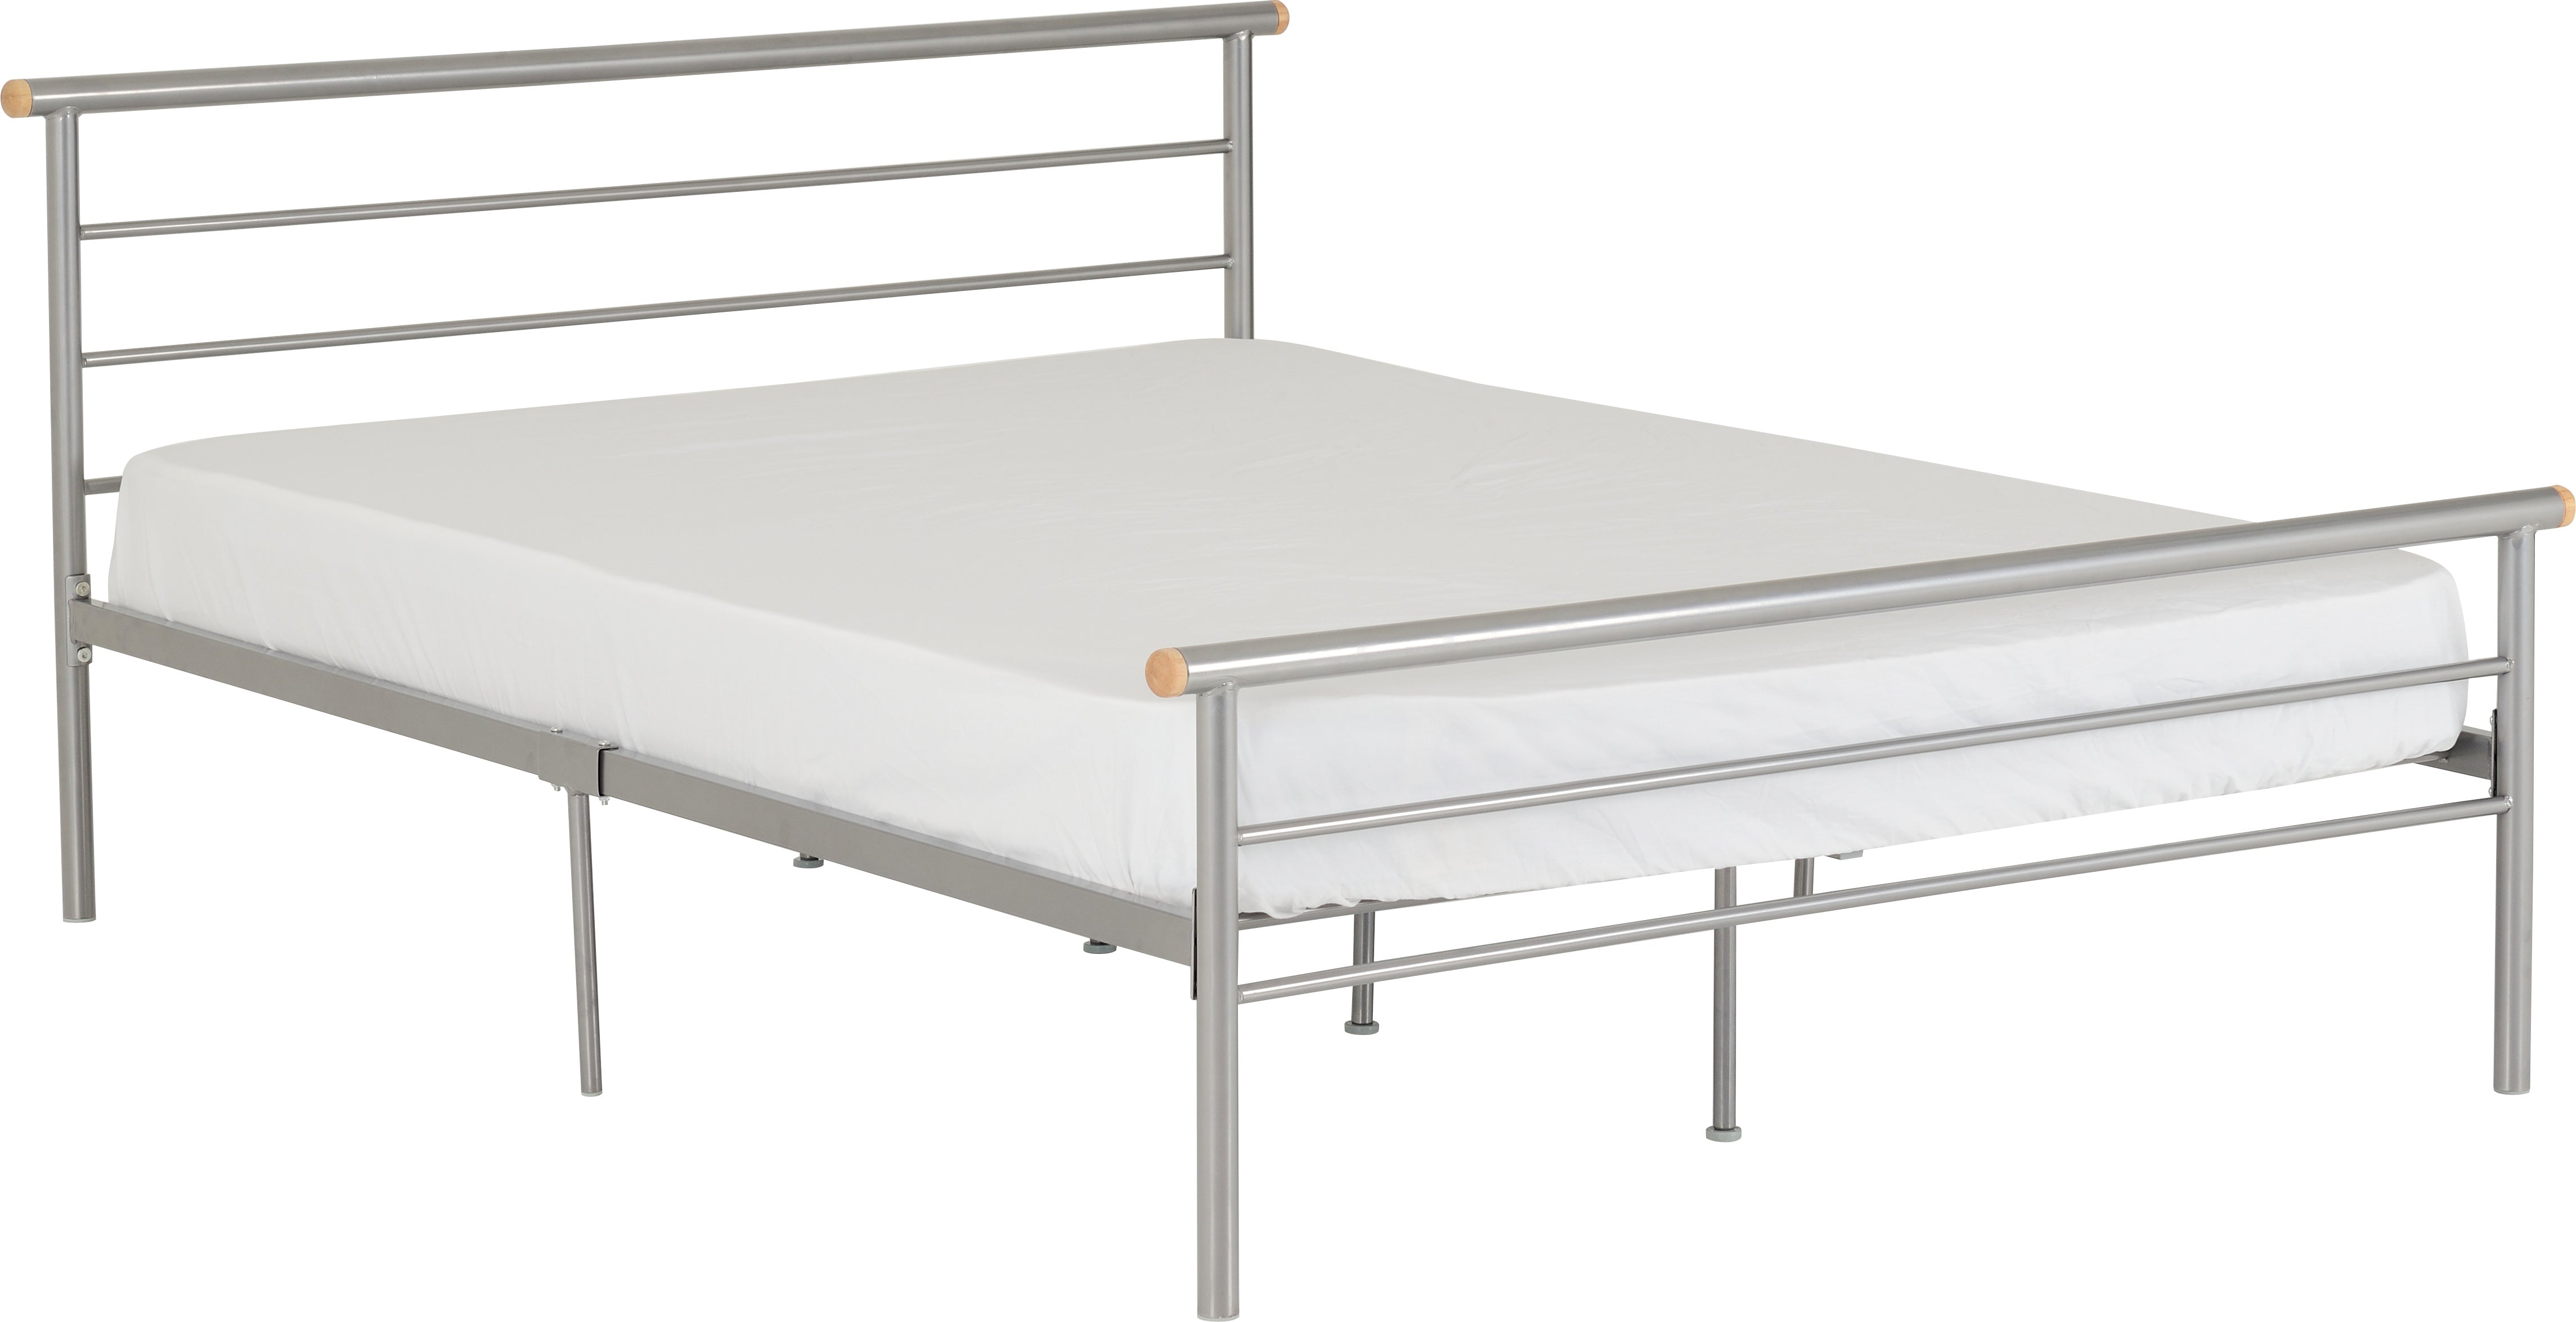 Orion 4' Bed Silver